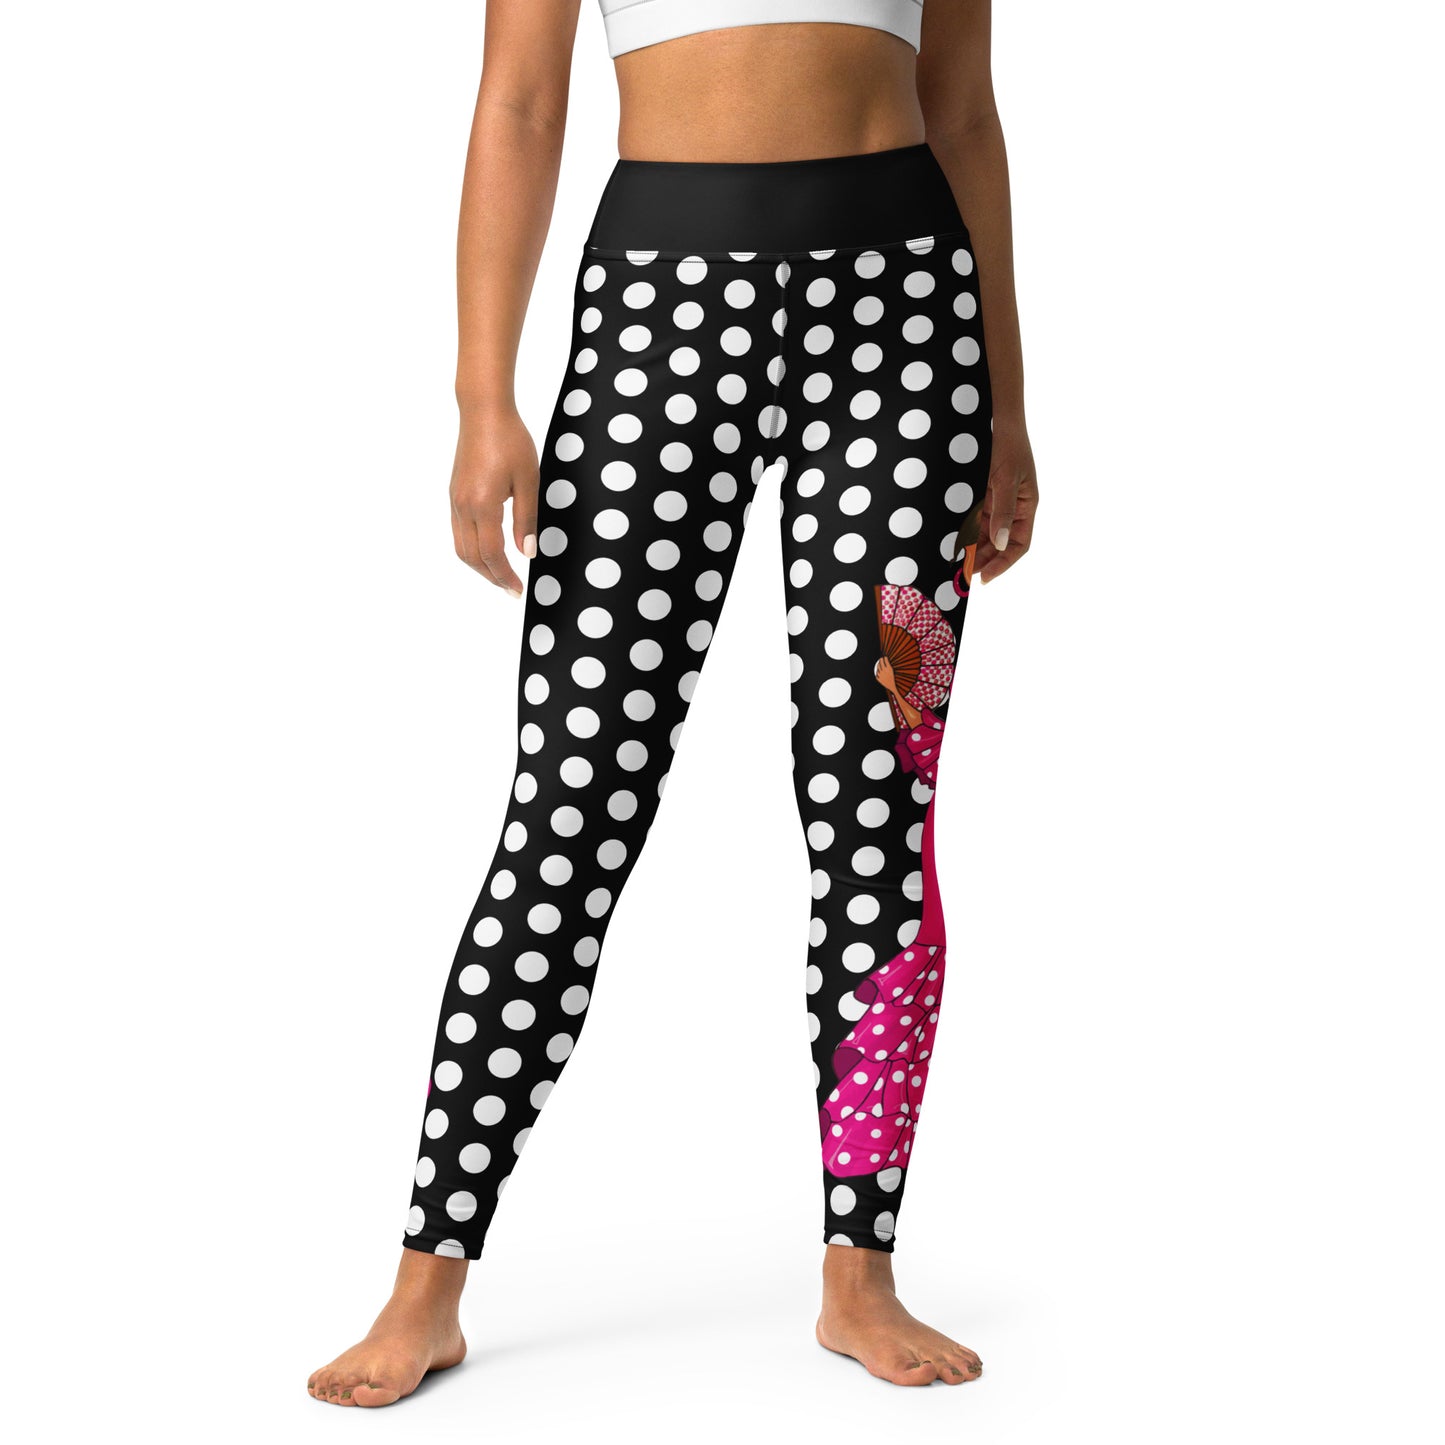 a women's leggings with polka dots and a pink flower